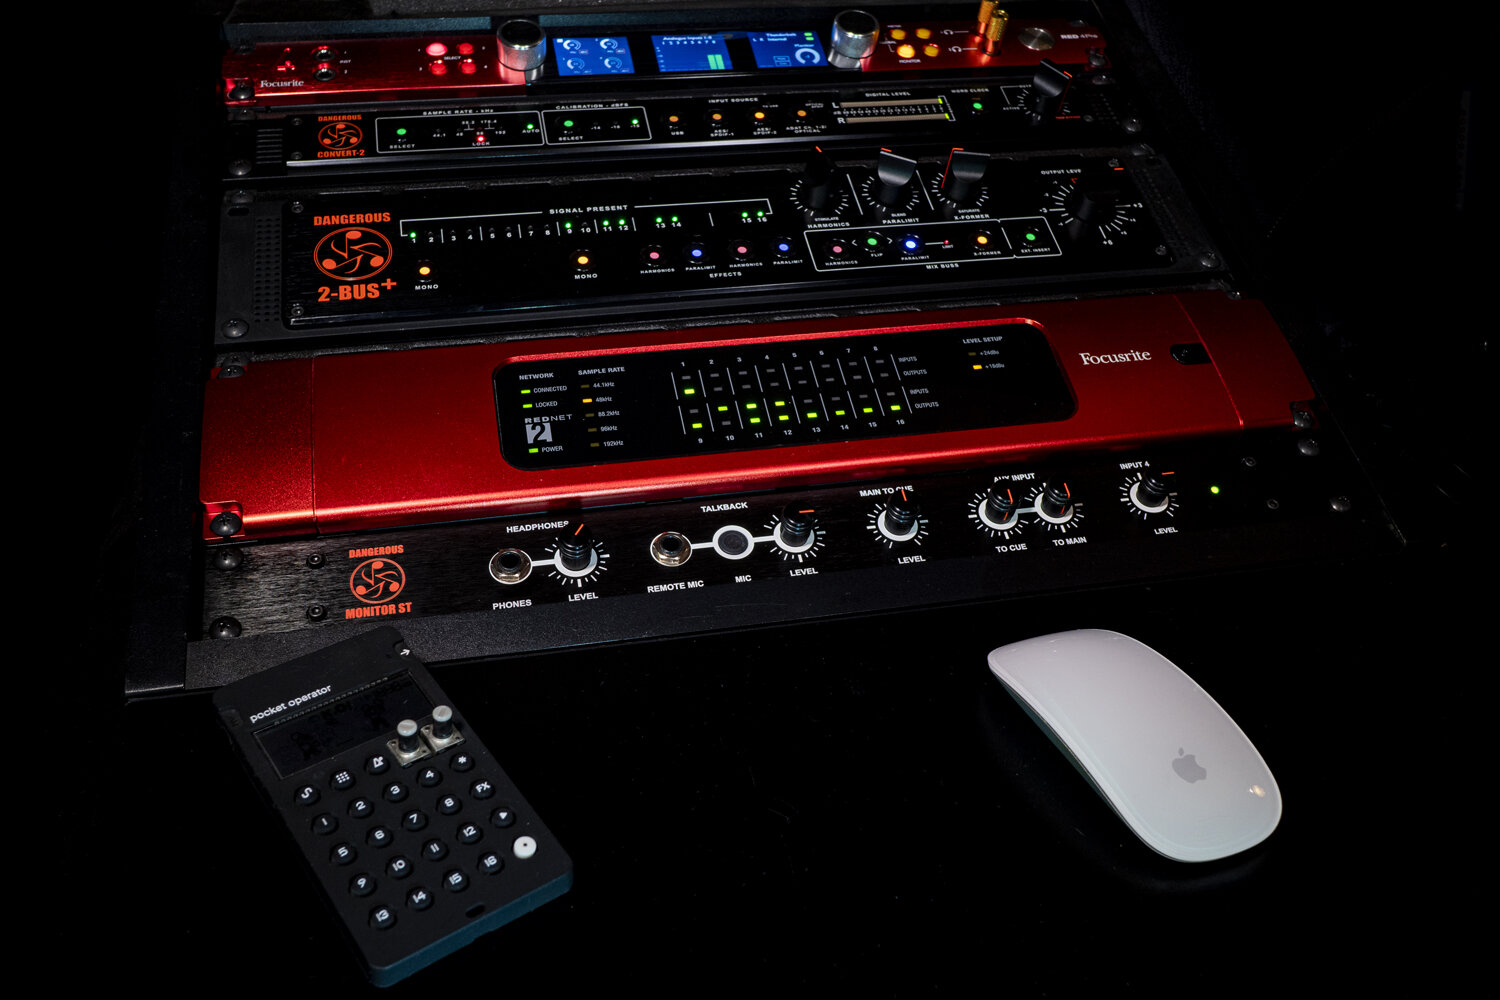 STEREO MONITOR CONTROL SYSTEM FOR THE 21ST CENTURY STUDIO 